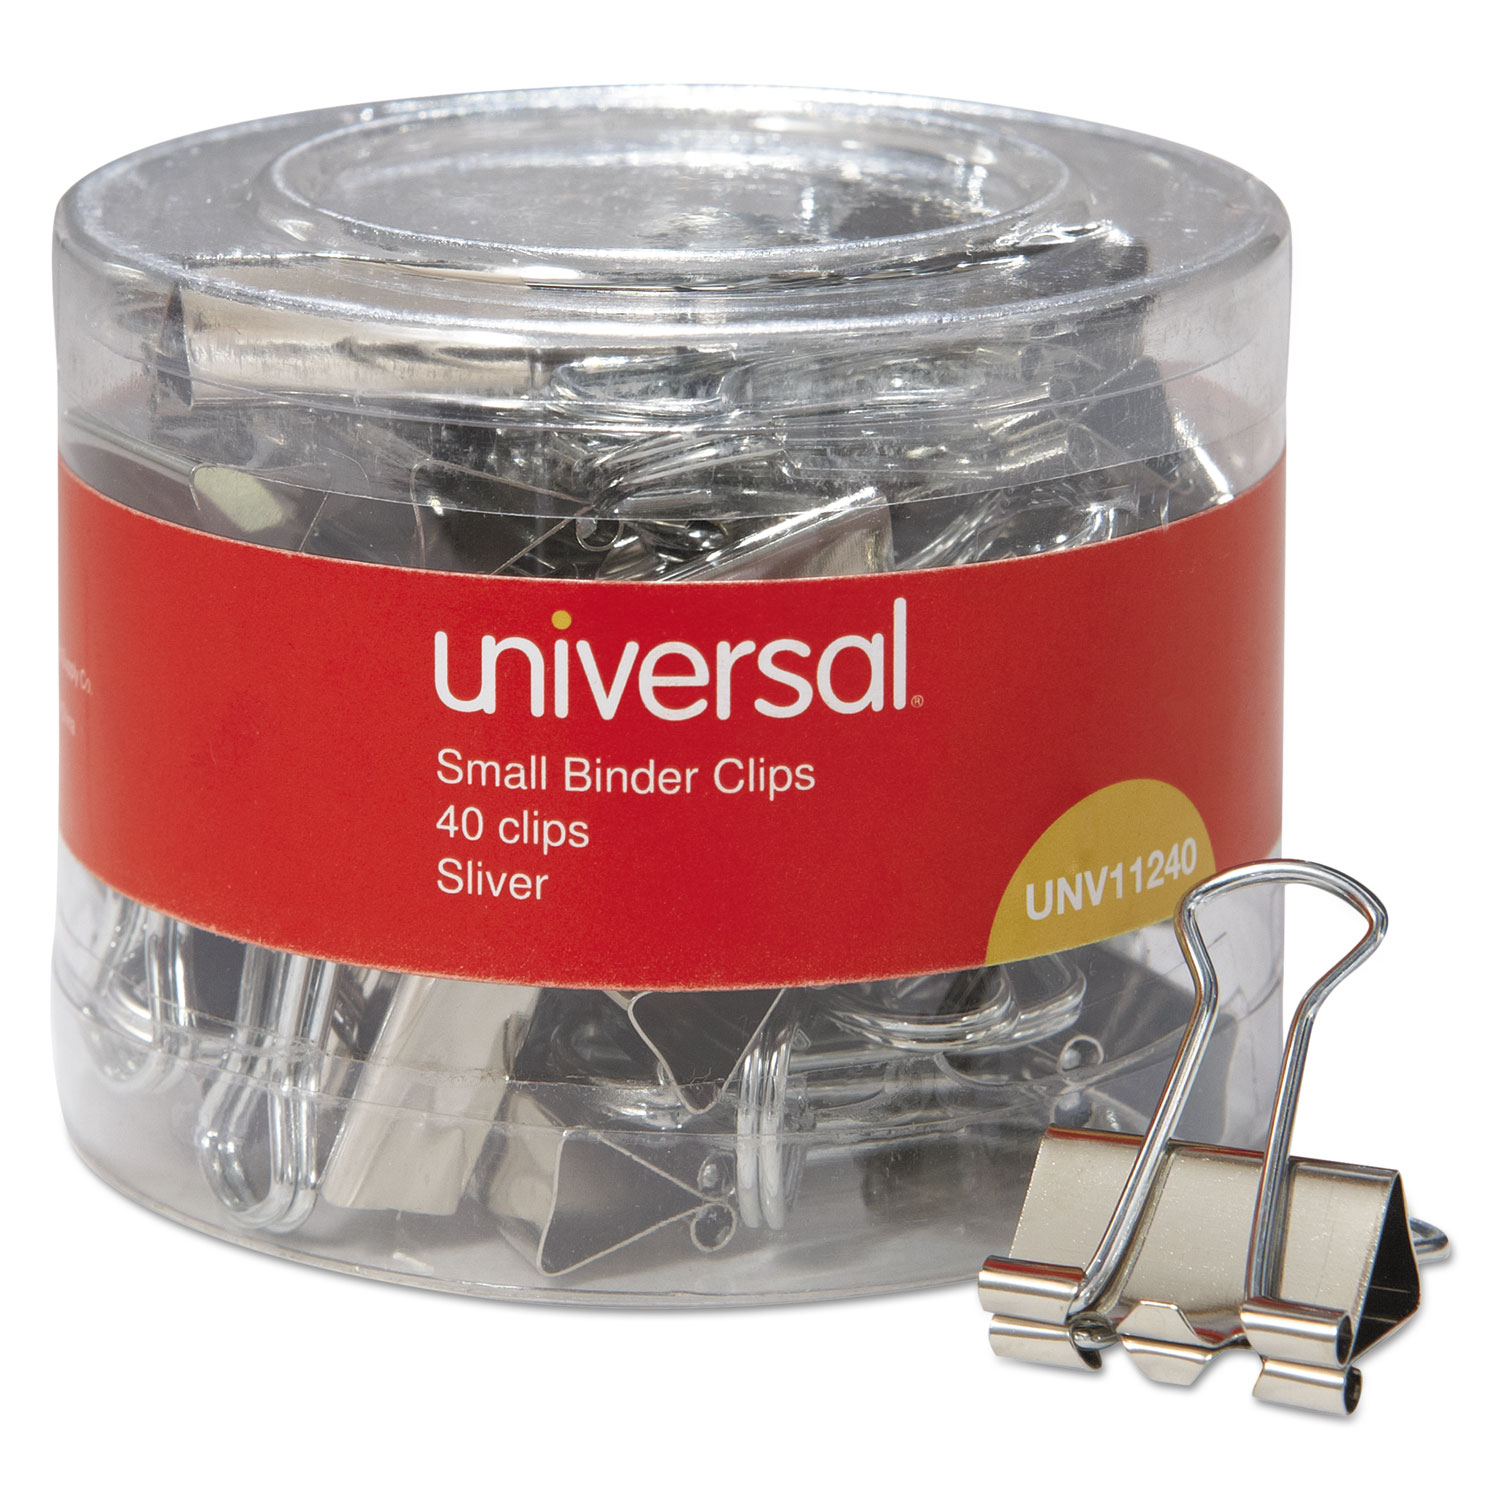  Universal UNV11240 Binder Clips in Dispenser Tub, Small, Silver, 40/Pack (UNV11240) 